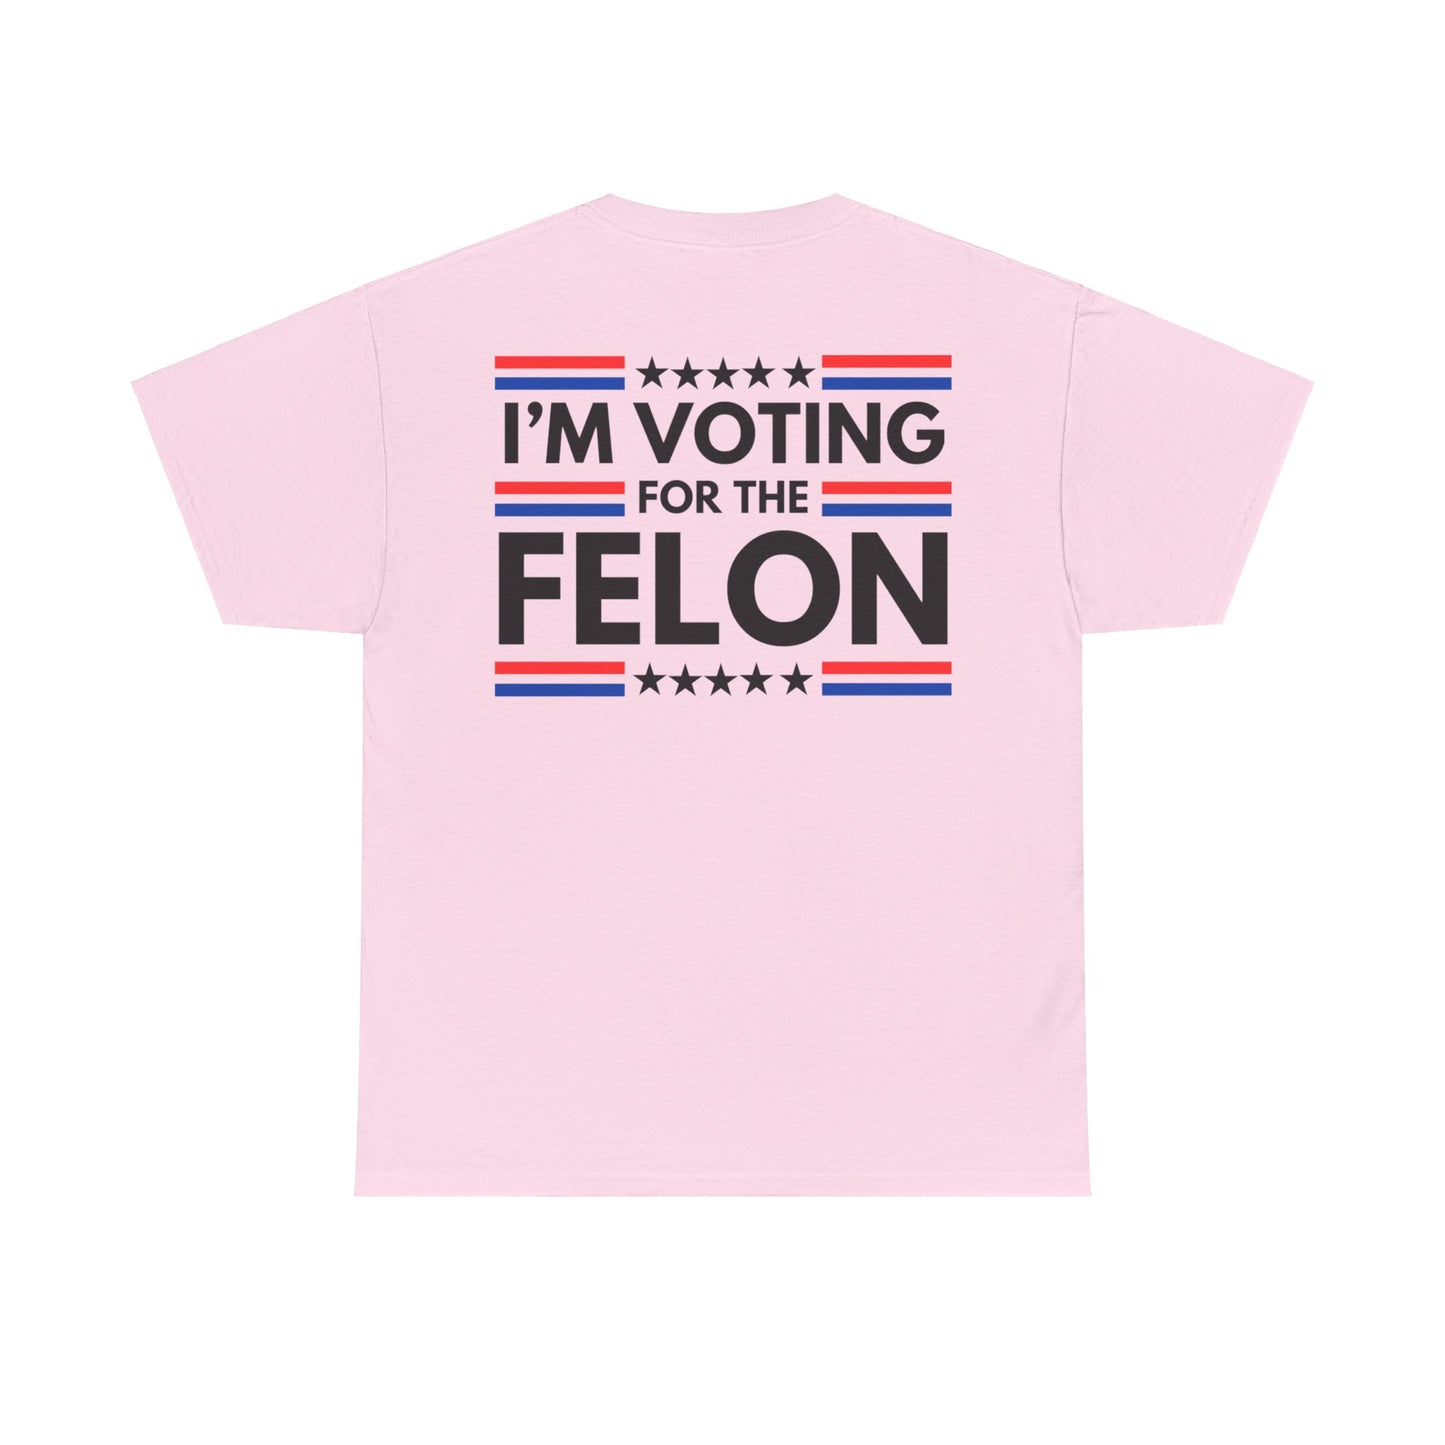 Get trendy with I'm Voting for the Felon Trump 47 (black Stars) Unisex Heavy Cotton Tee - T-Shirt available at Good Gift Company. Grab yours for $16.97 today!